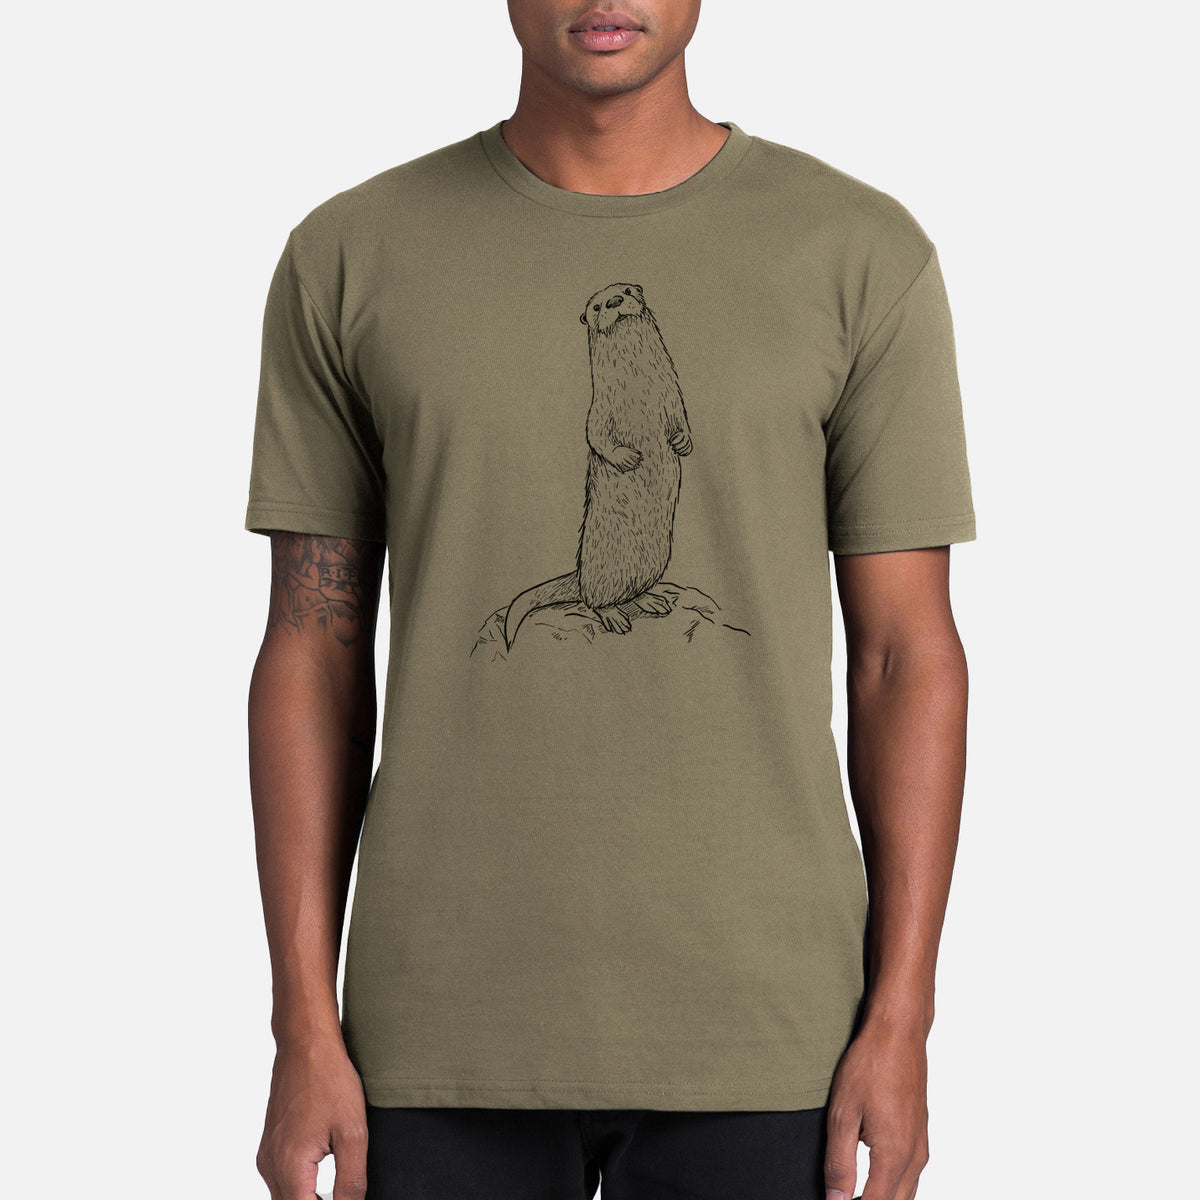 North American River Otter - Lontra canadensis - Mens Everyday Staple Tee